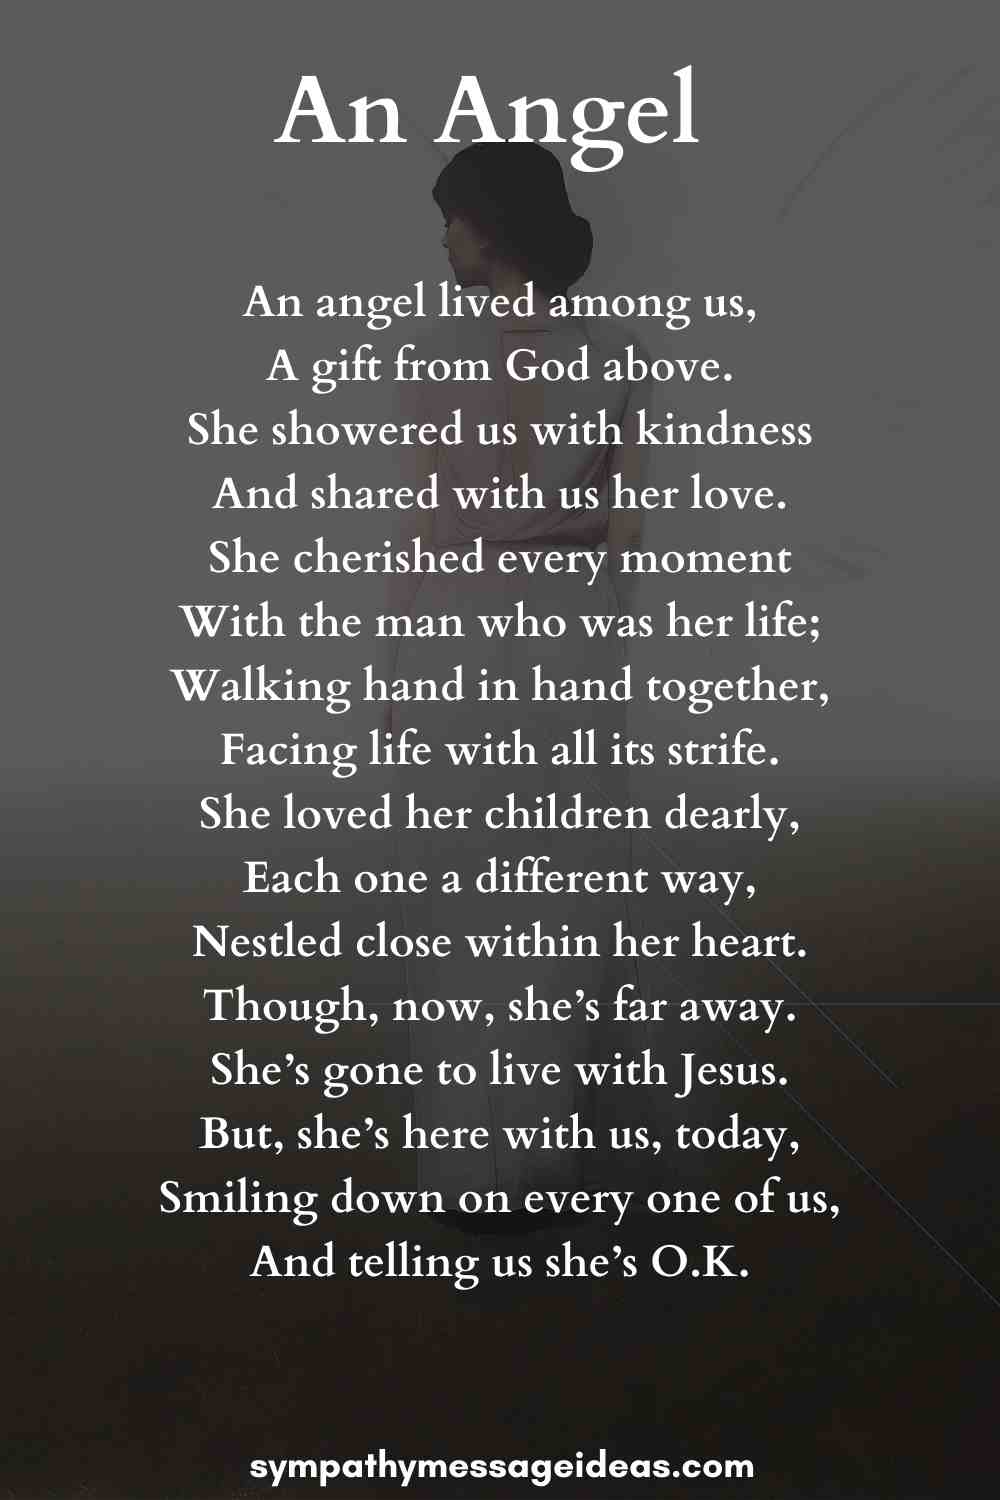 an angel funeral poem for a mom